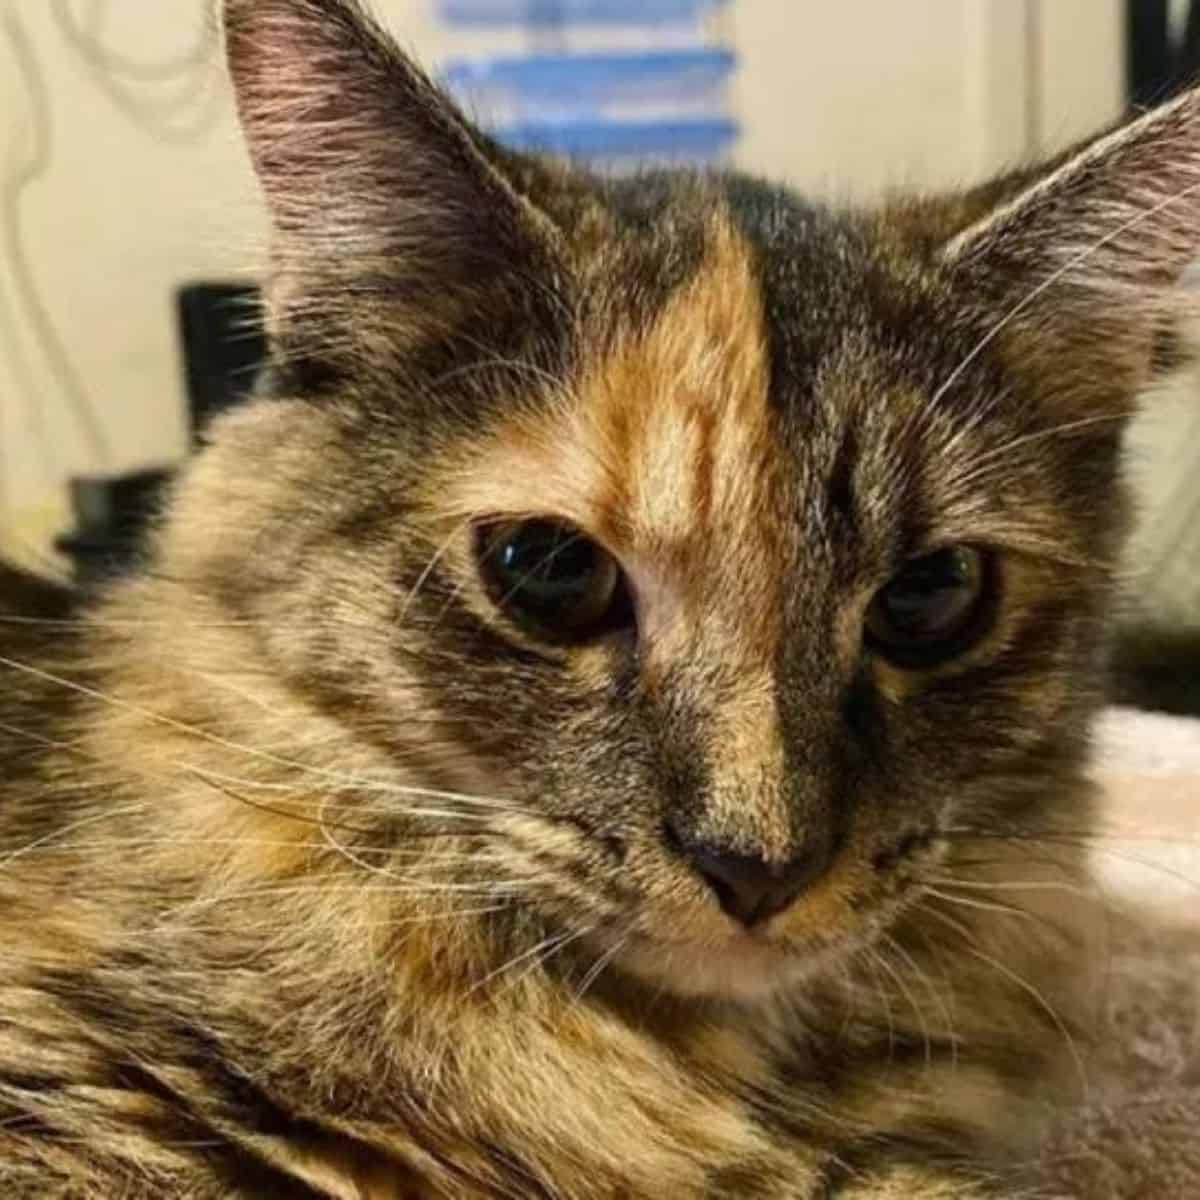 close-up photo of the cat chimera